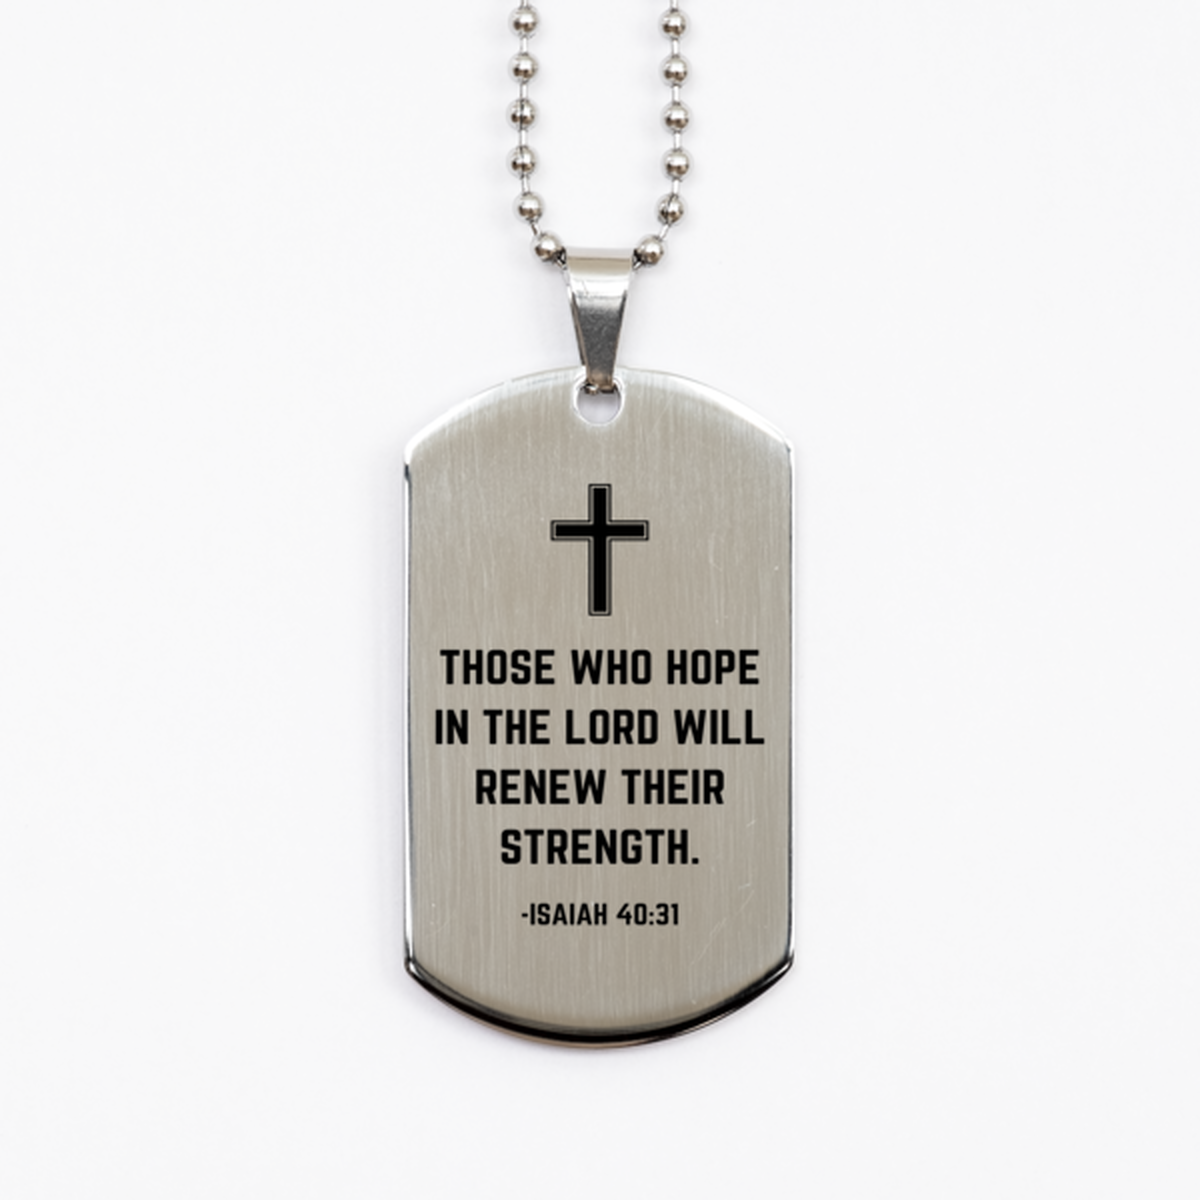 Baptism Gifts For Teenage Boys Girls, Christian Bible Verse Silver Dog Tag, Those who hope in the Lord, Confirmation Gifts, Bible Verse Necklace for Son, Godson, Grandson, Nephew